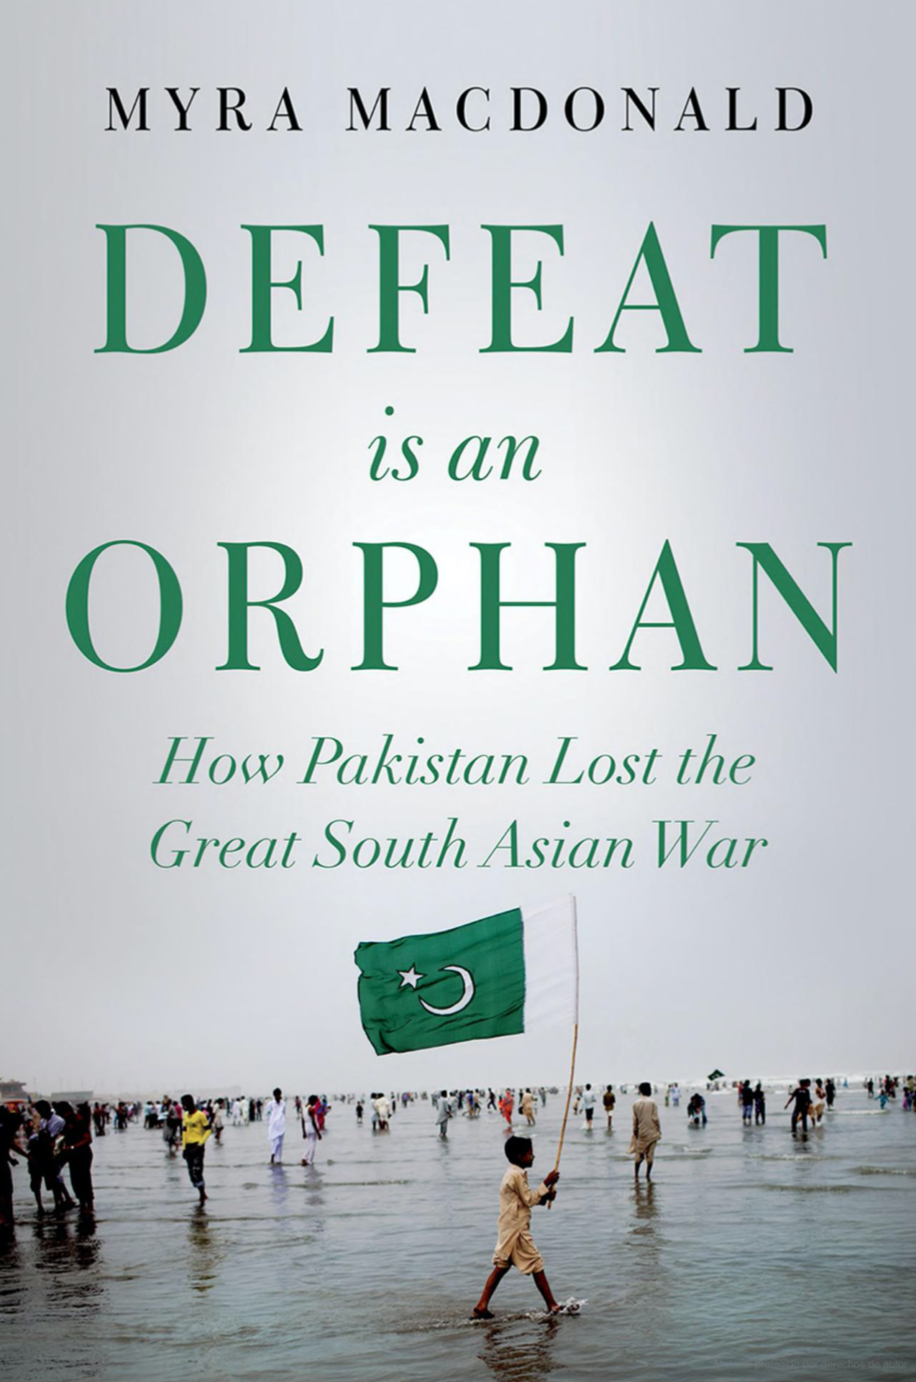 Defeat is an Orphan. How Pakistan Lost the Great South Asia War